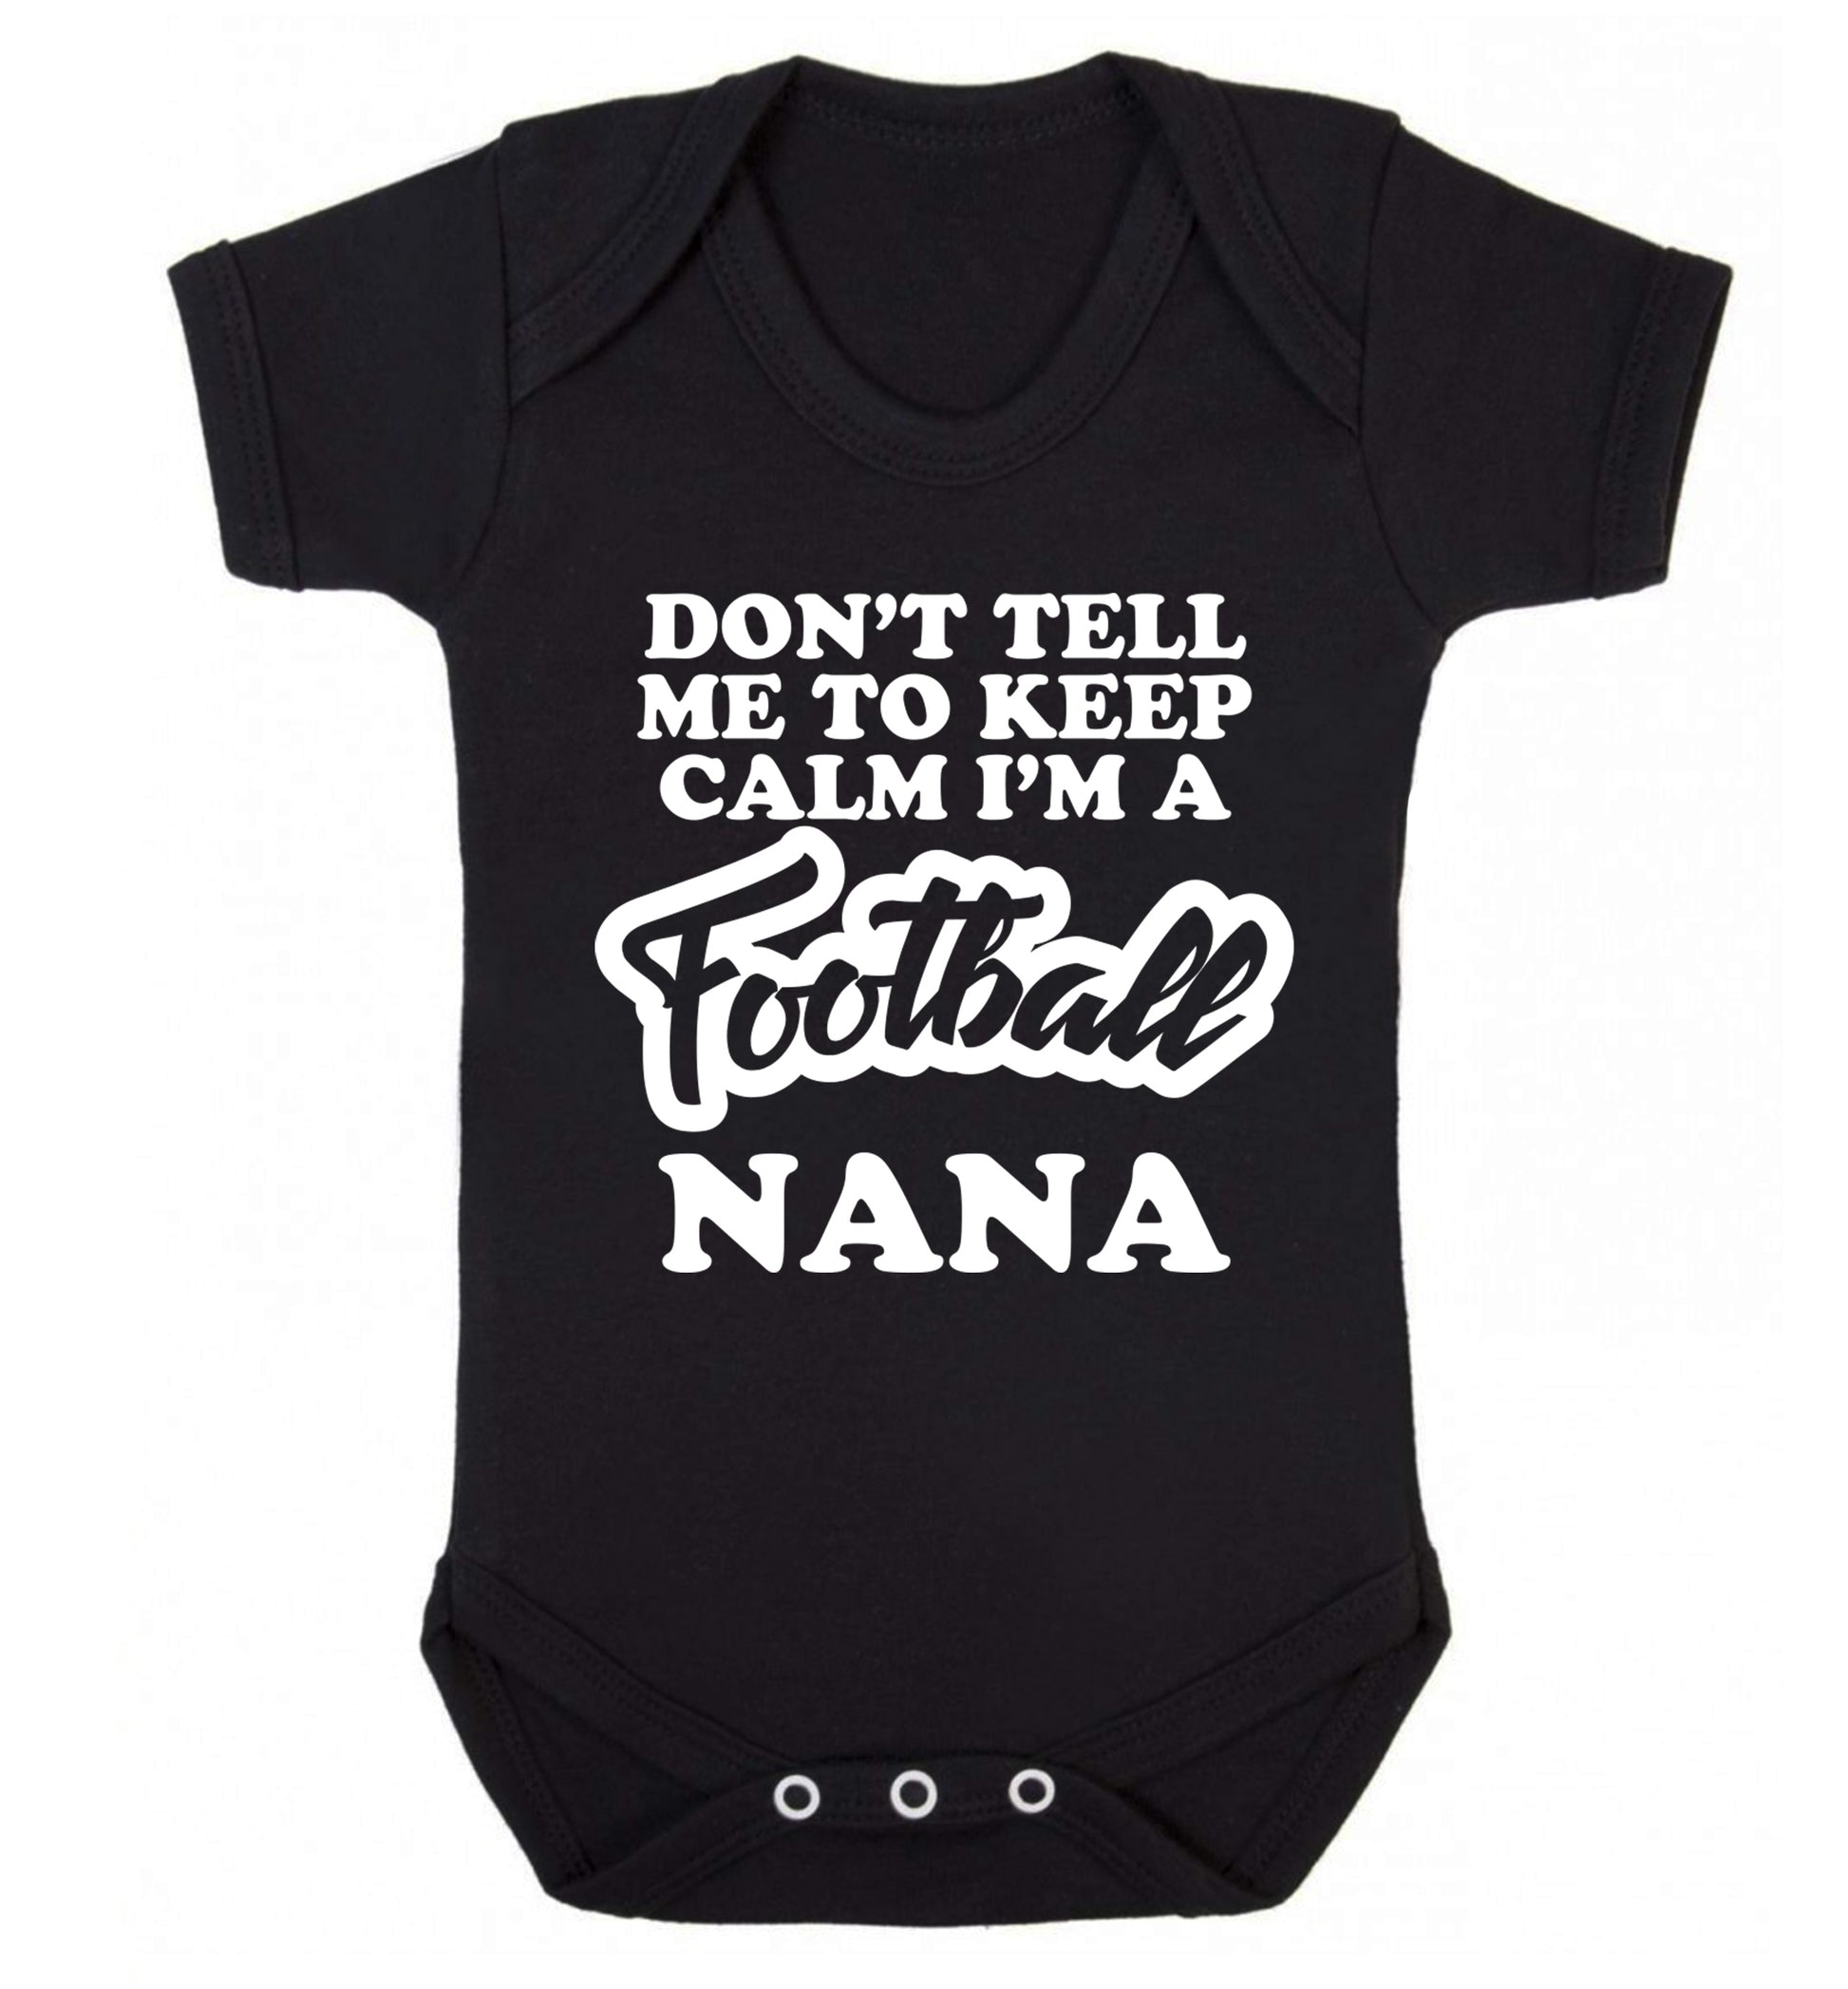 Don't tell me to keep calm I'm a football nana Baby Vest black 18-24 months